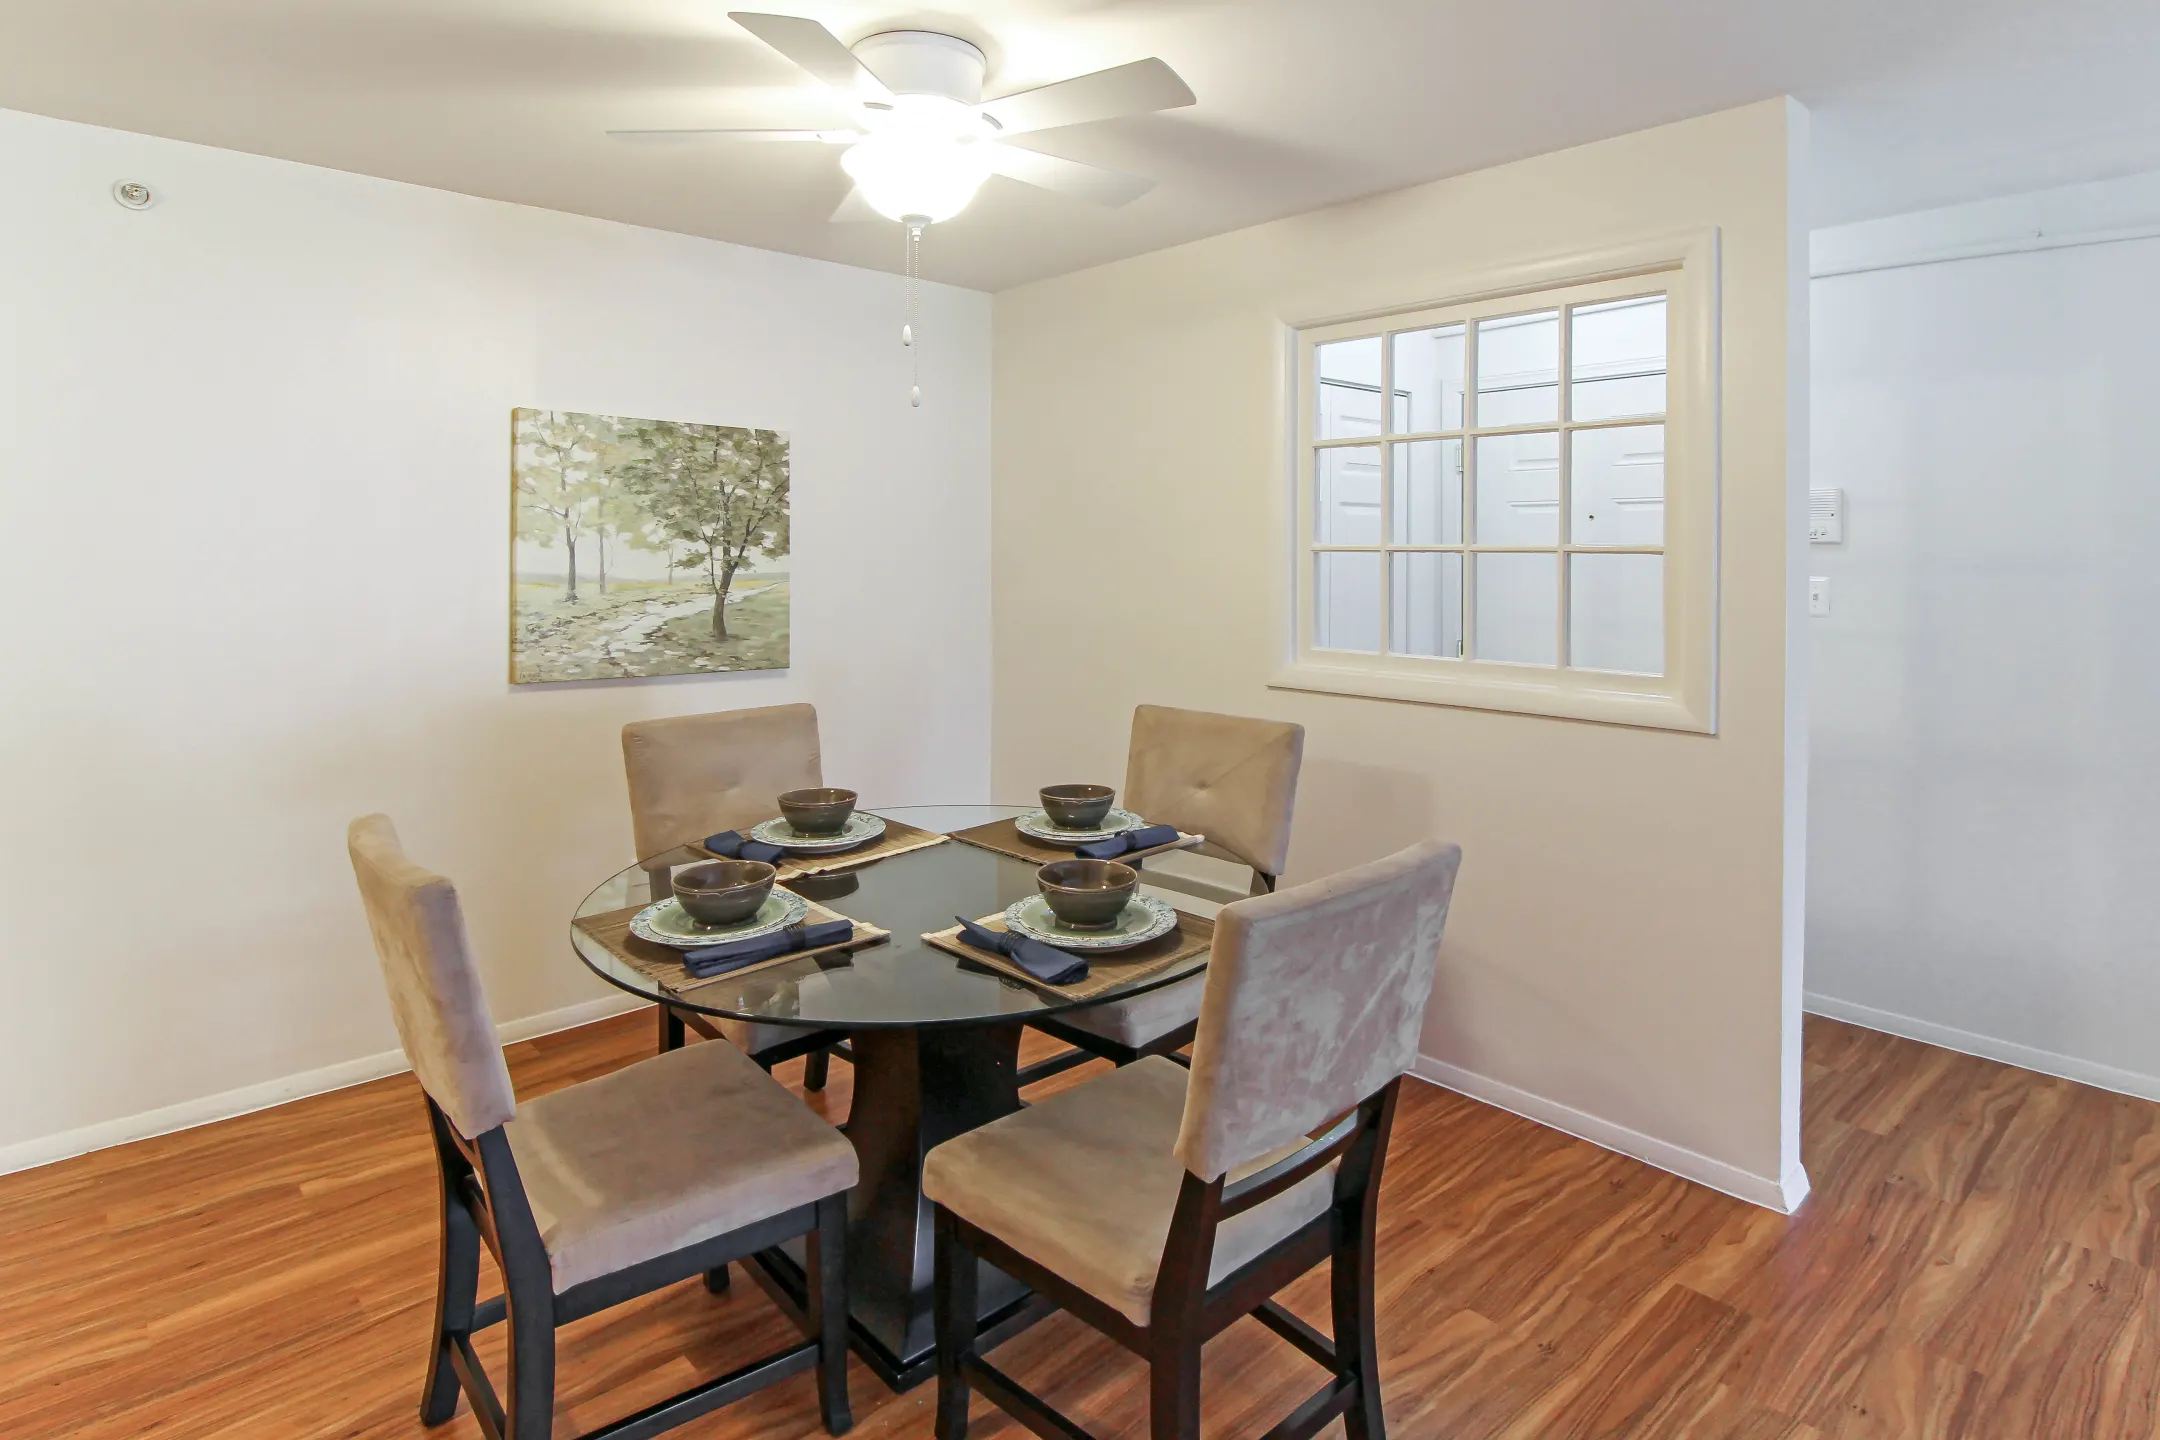 Dining Room - Scenictree Apartment Homes - Palos Hills, IL